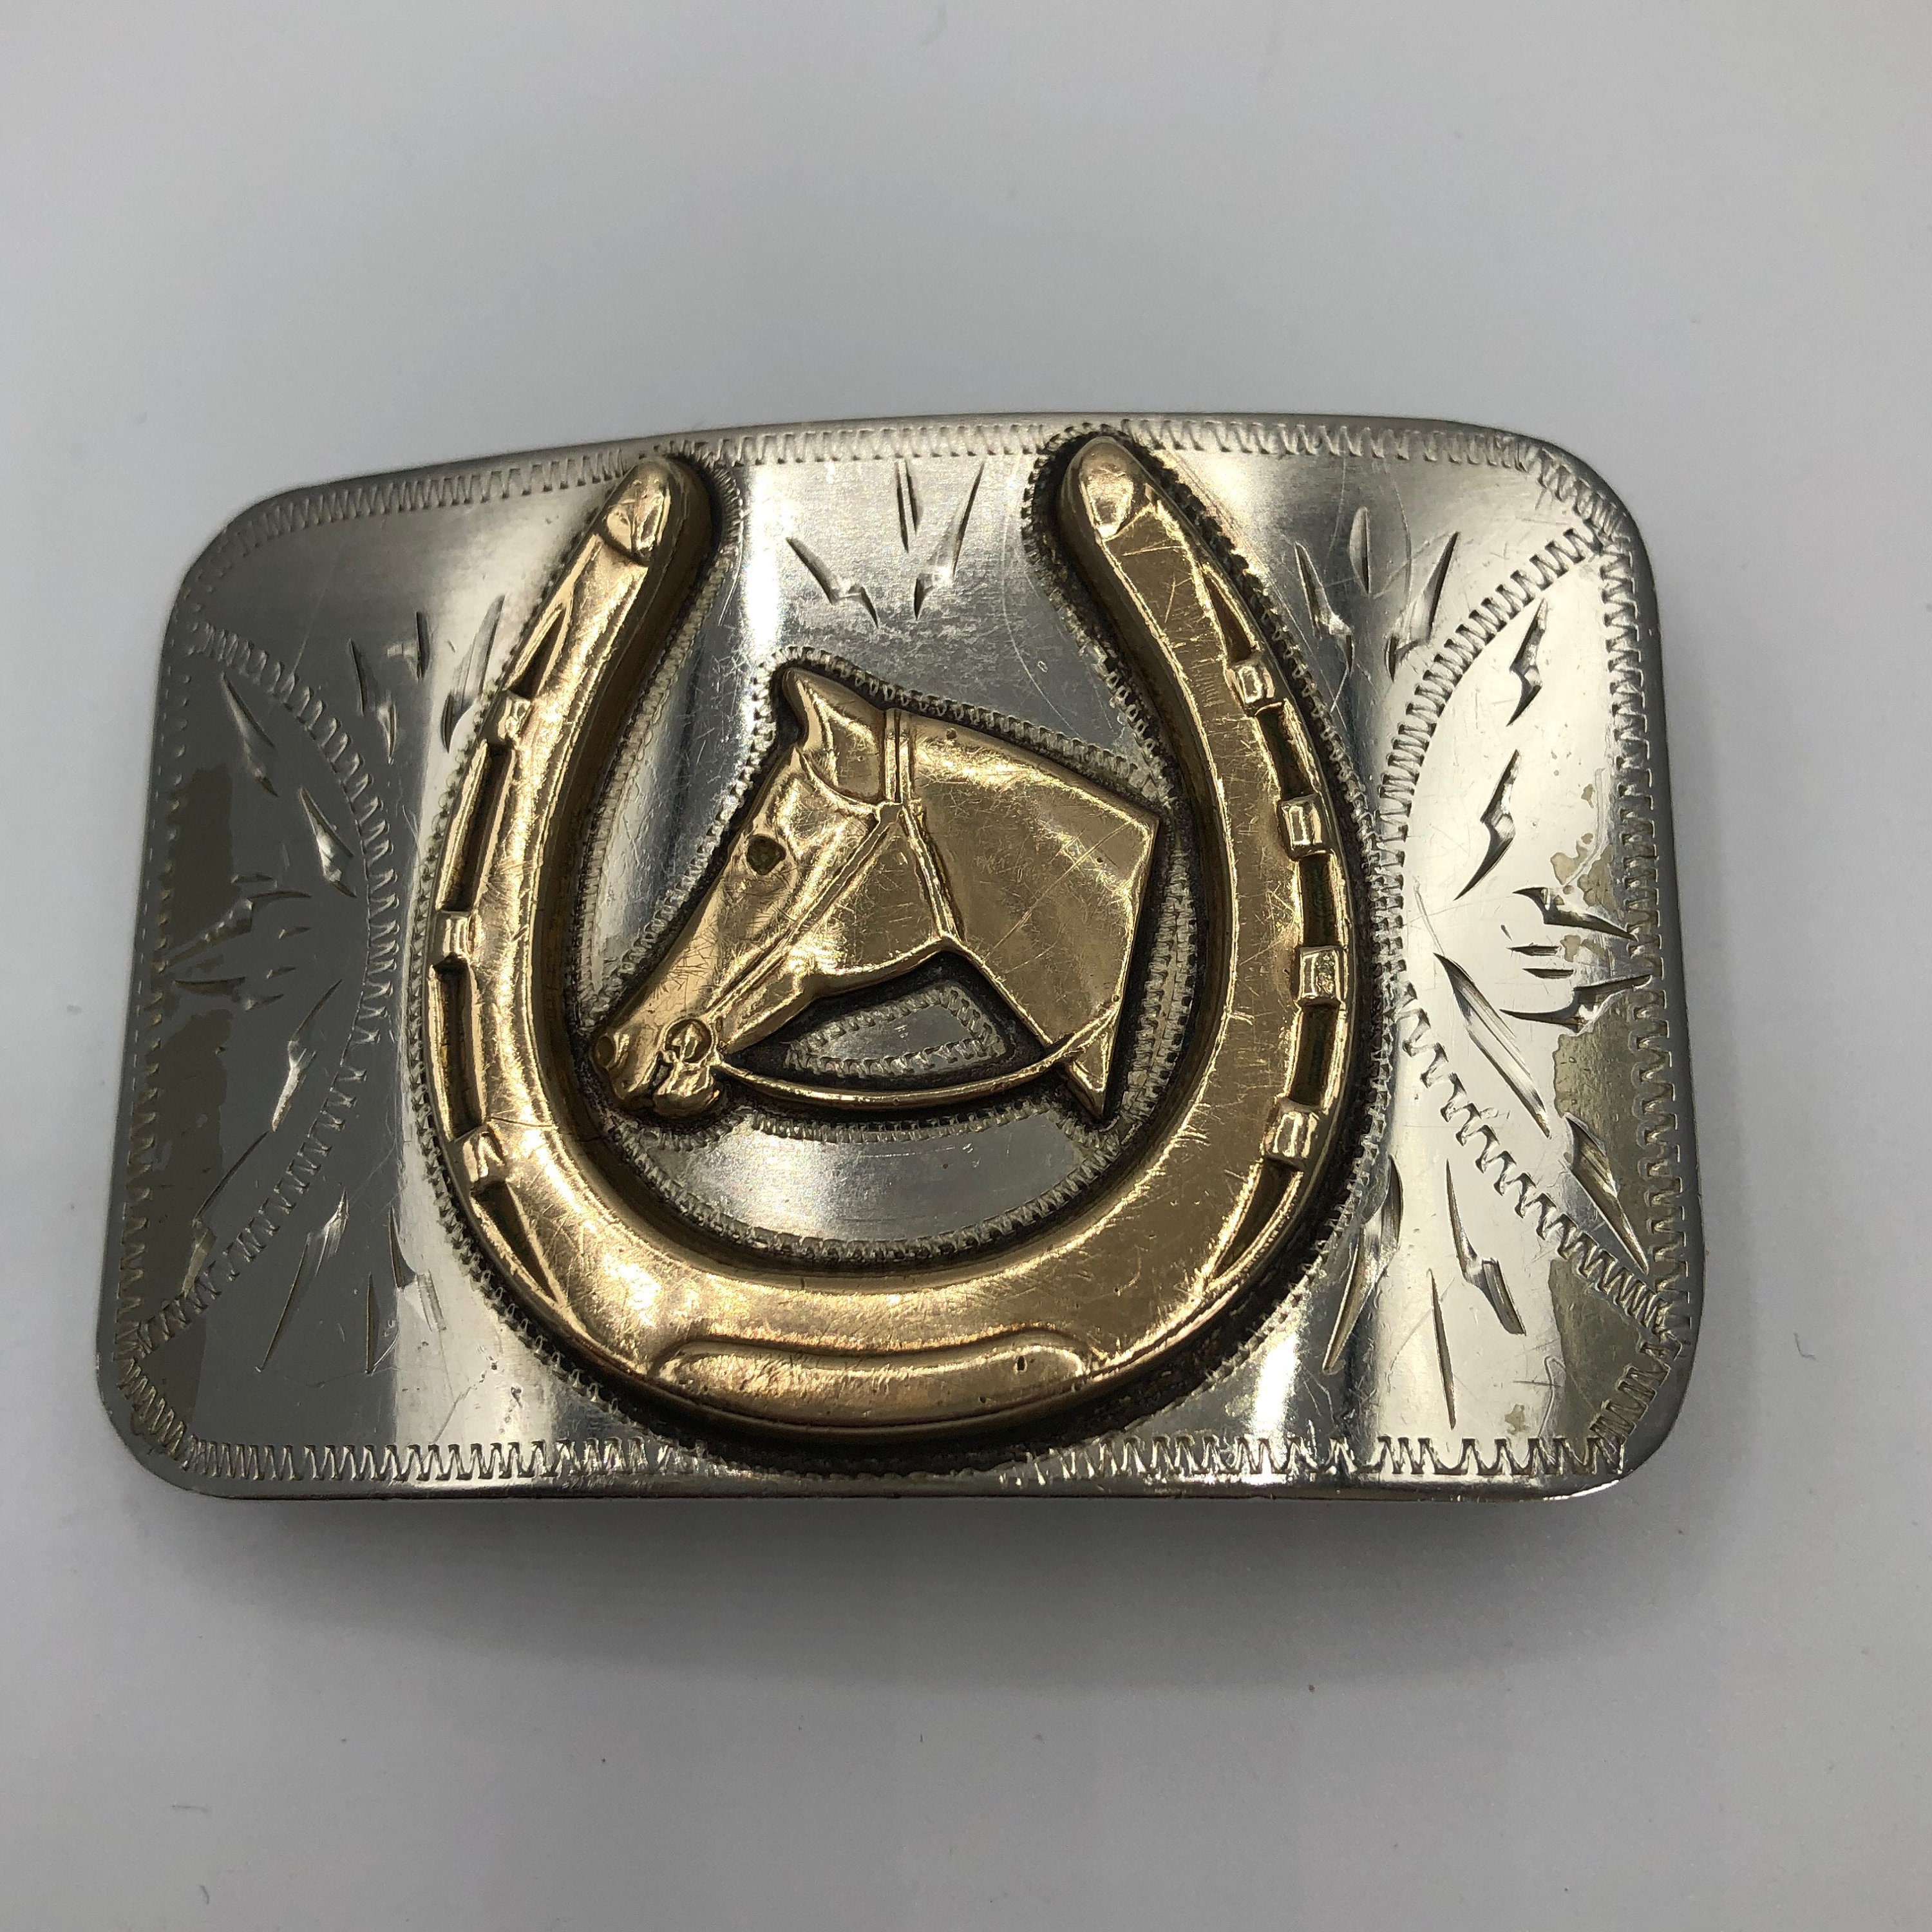 Made in USA Silver Belt Buckle - USA Amish Made Leather Belt